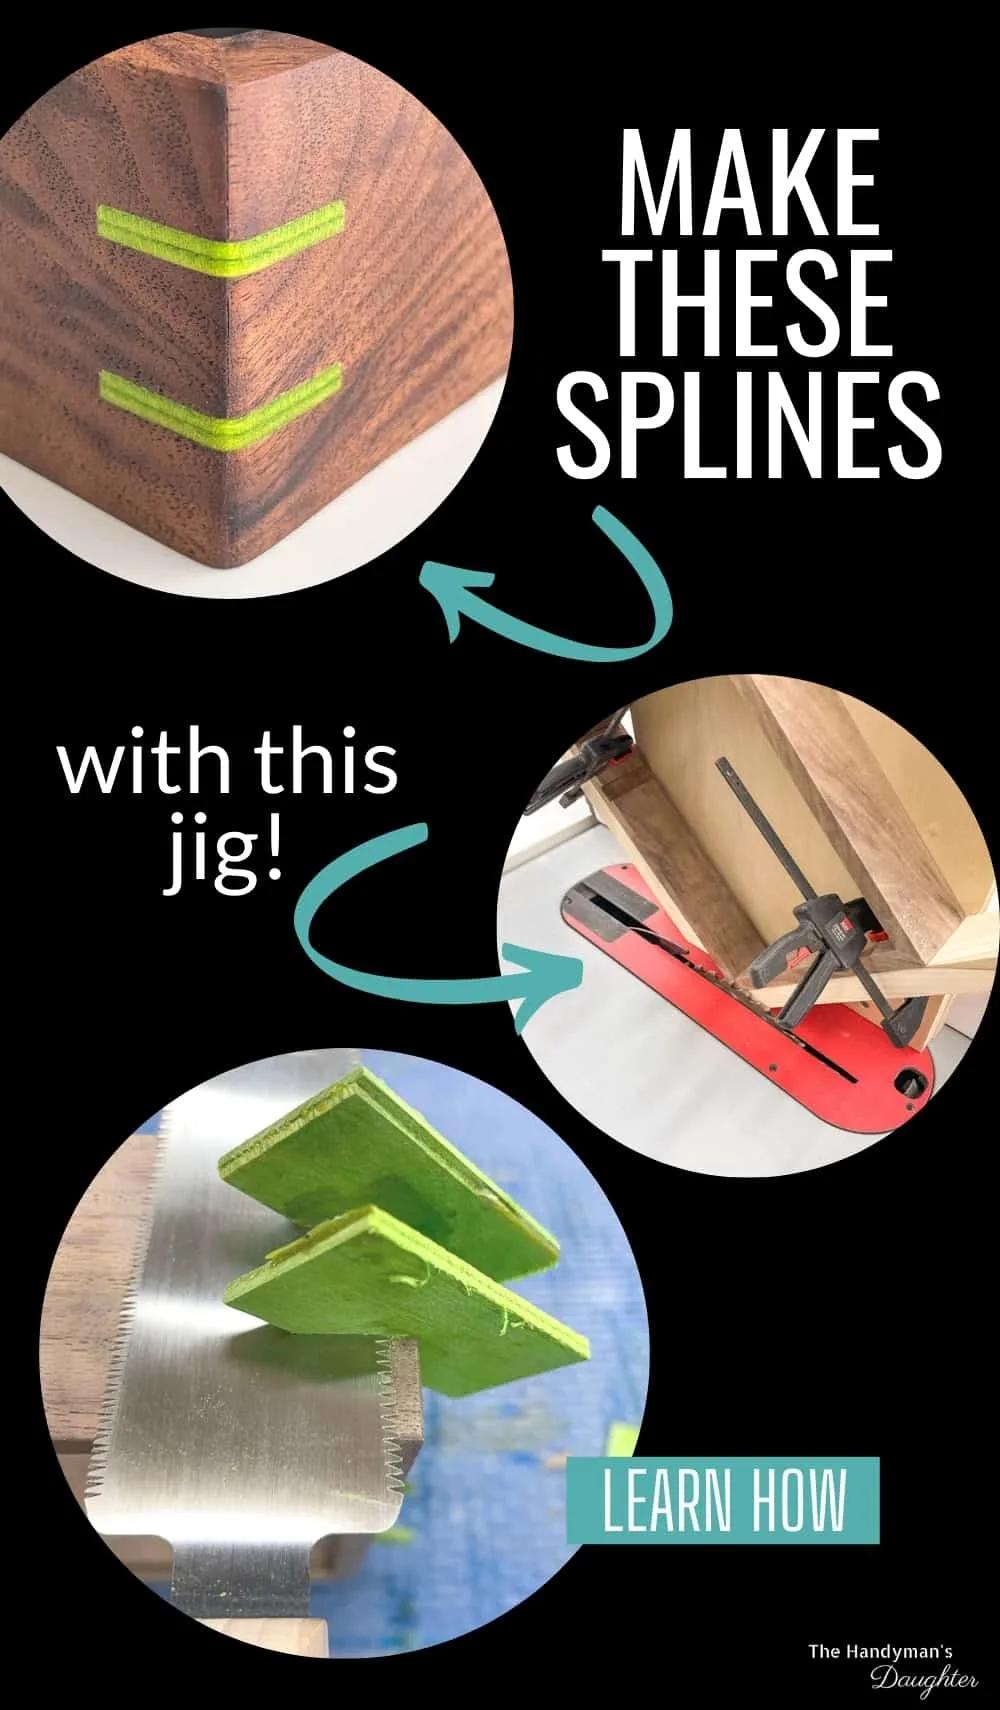 make these splines with this jig!